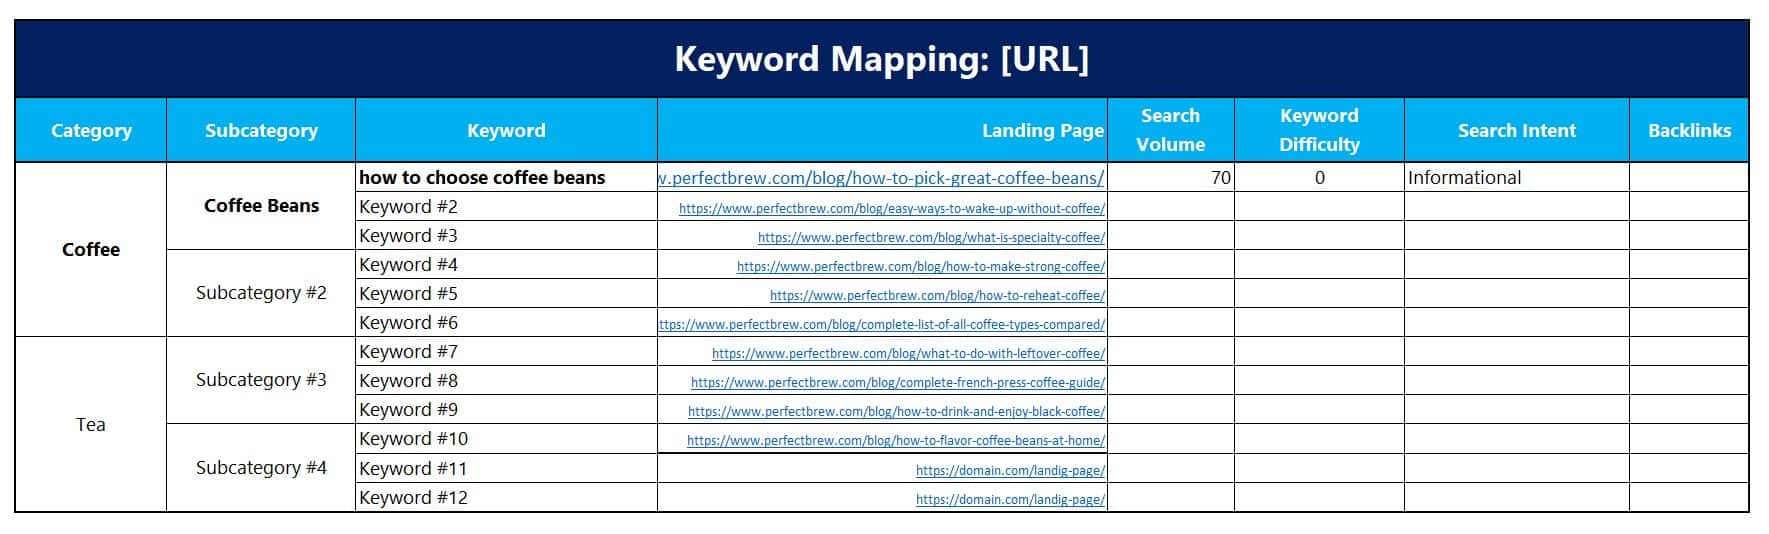 seo keyword mapping update for url example 1